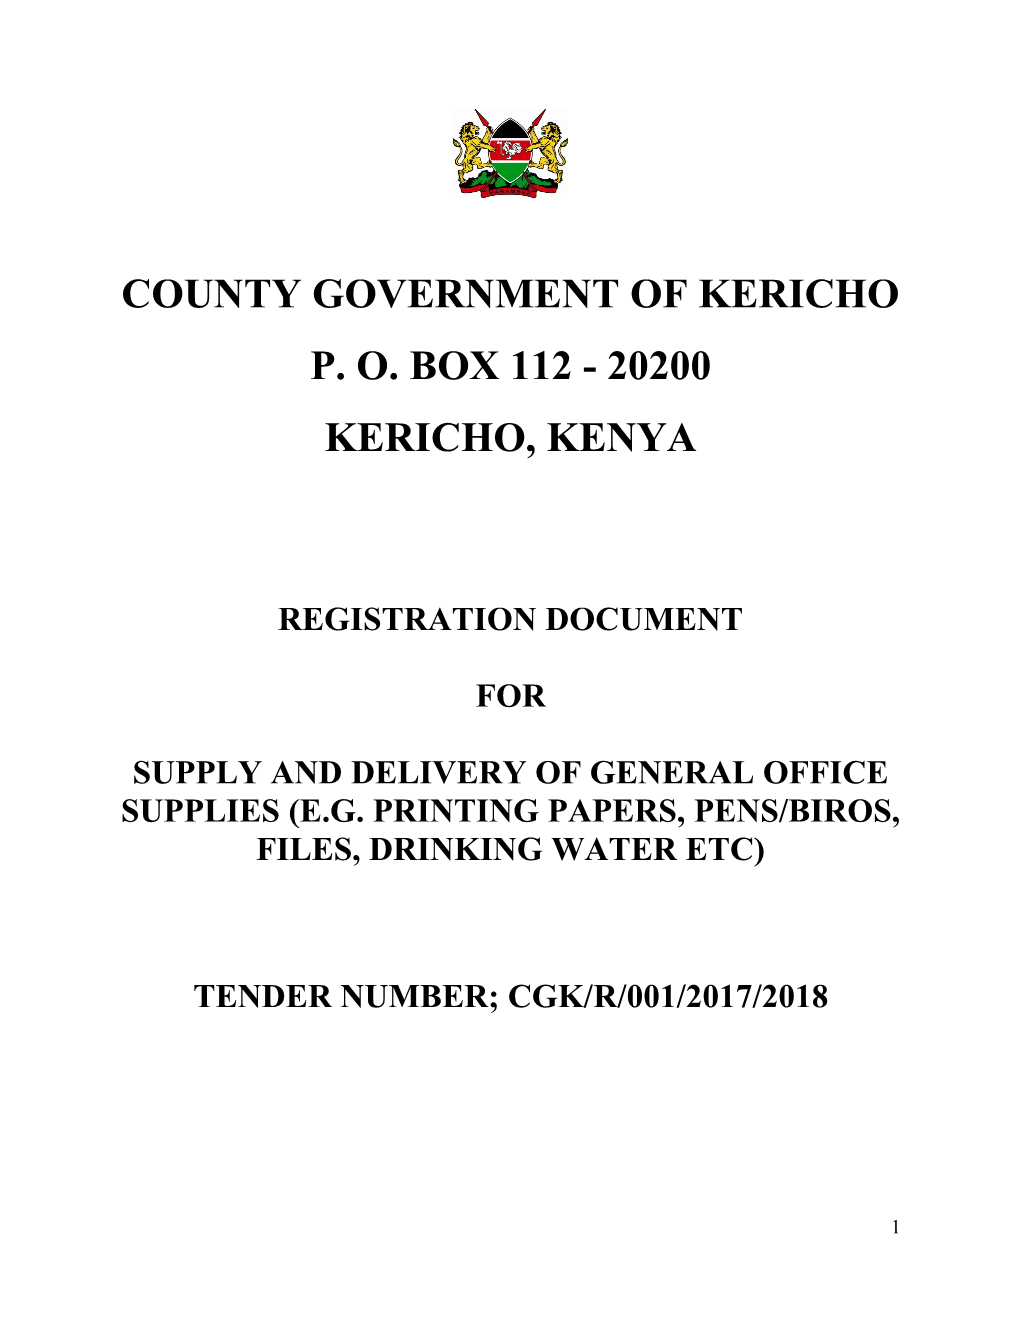 County Government of Kericho